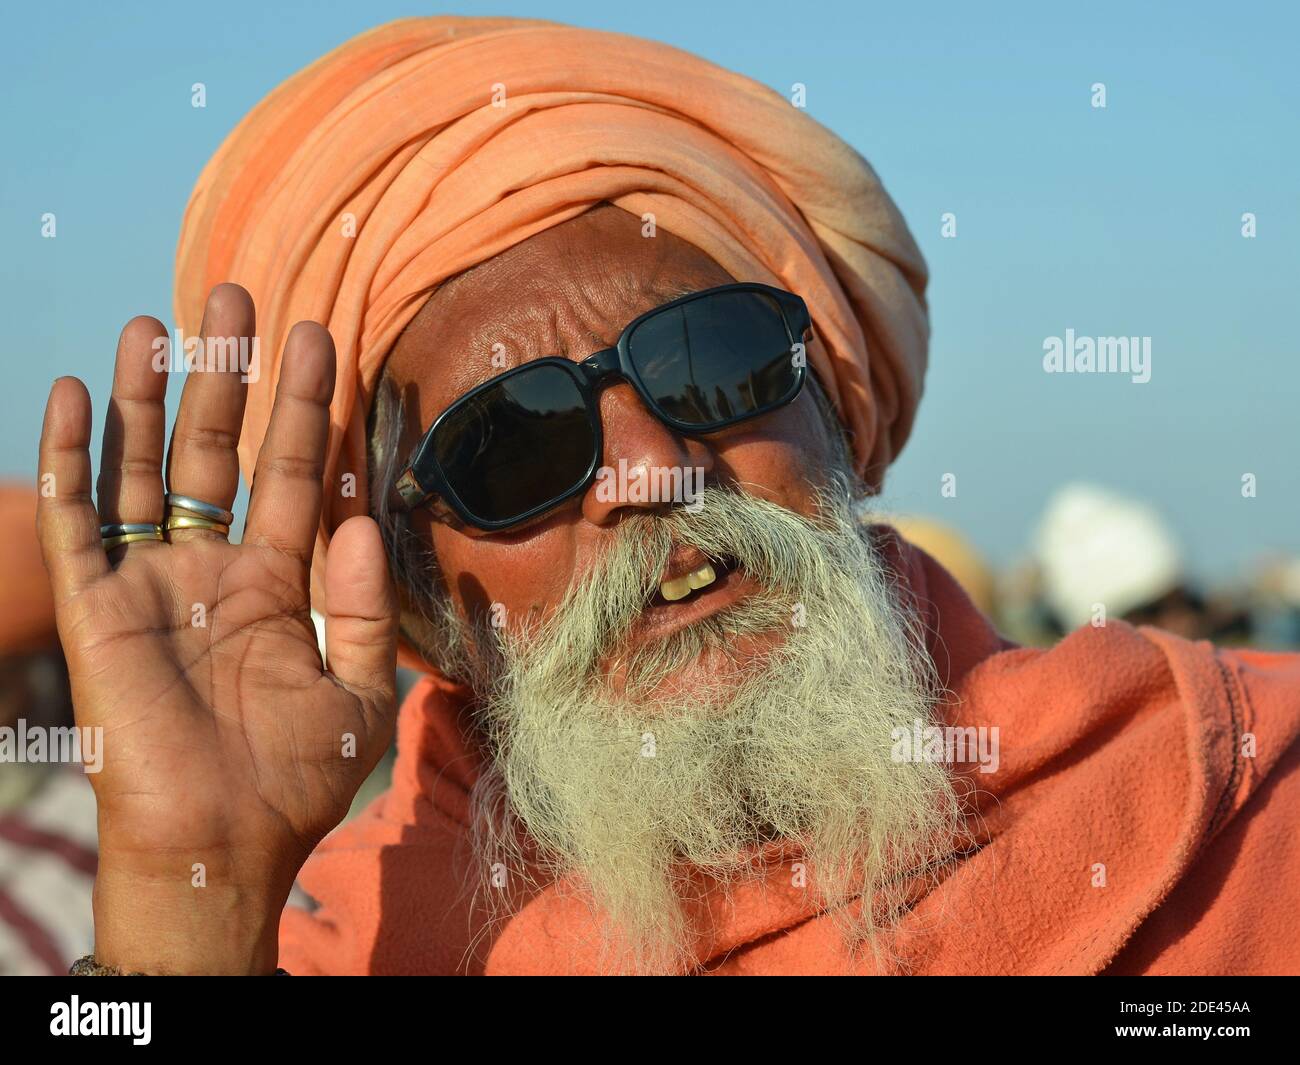 Old Indian Hindu sadhu baba with orange turban and dark sunglasses raises his right hand in order to greet and offer a blessing. Stock Photo